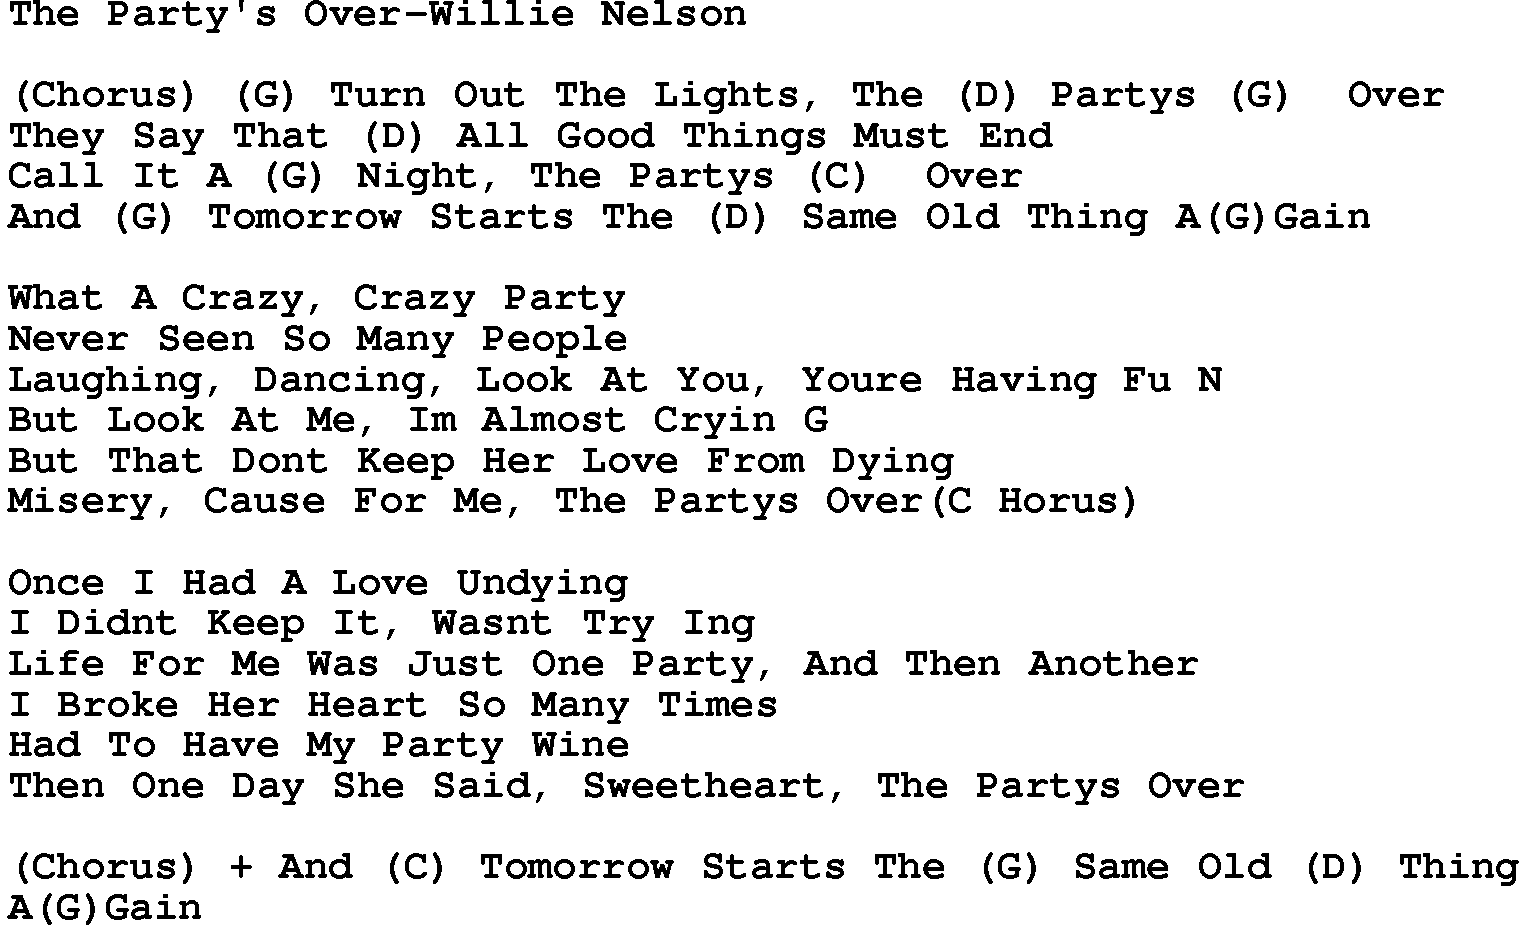 Country music song: The Party's Over-Willie Nelson lyrics and chords